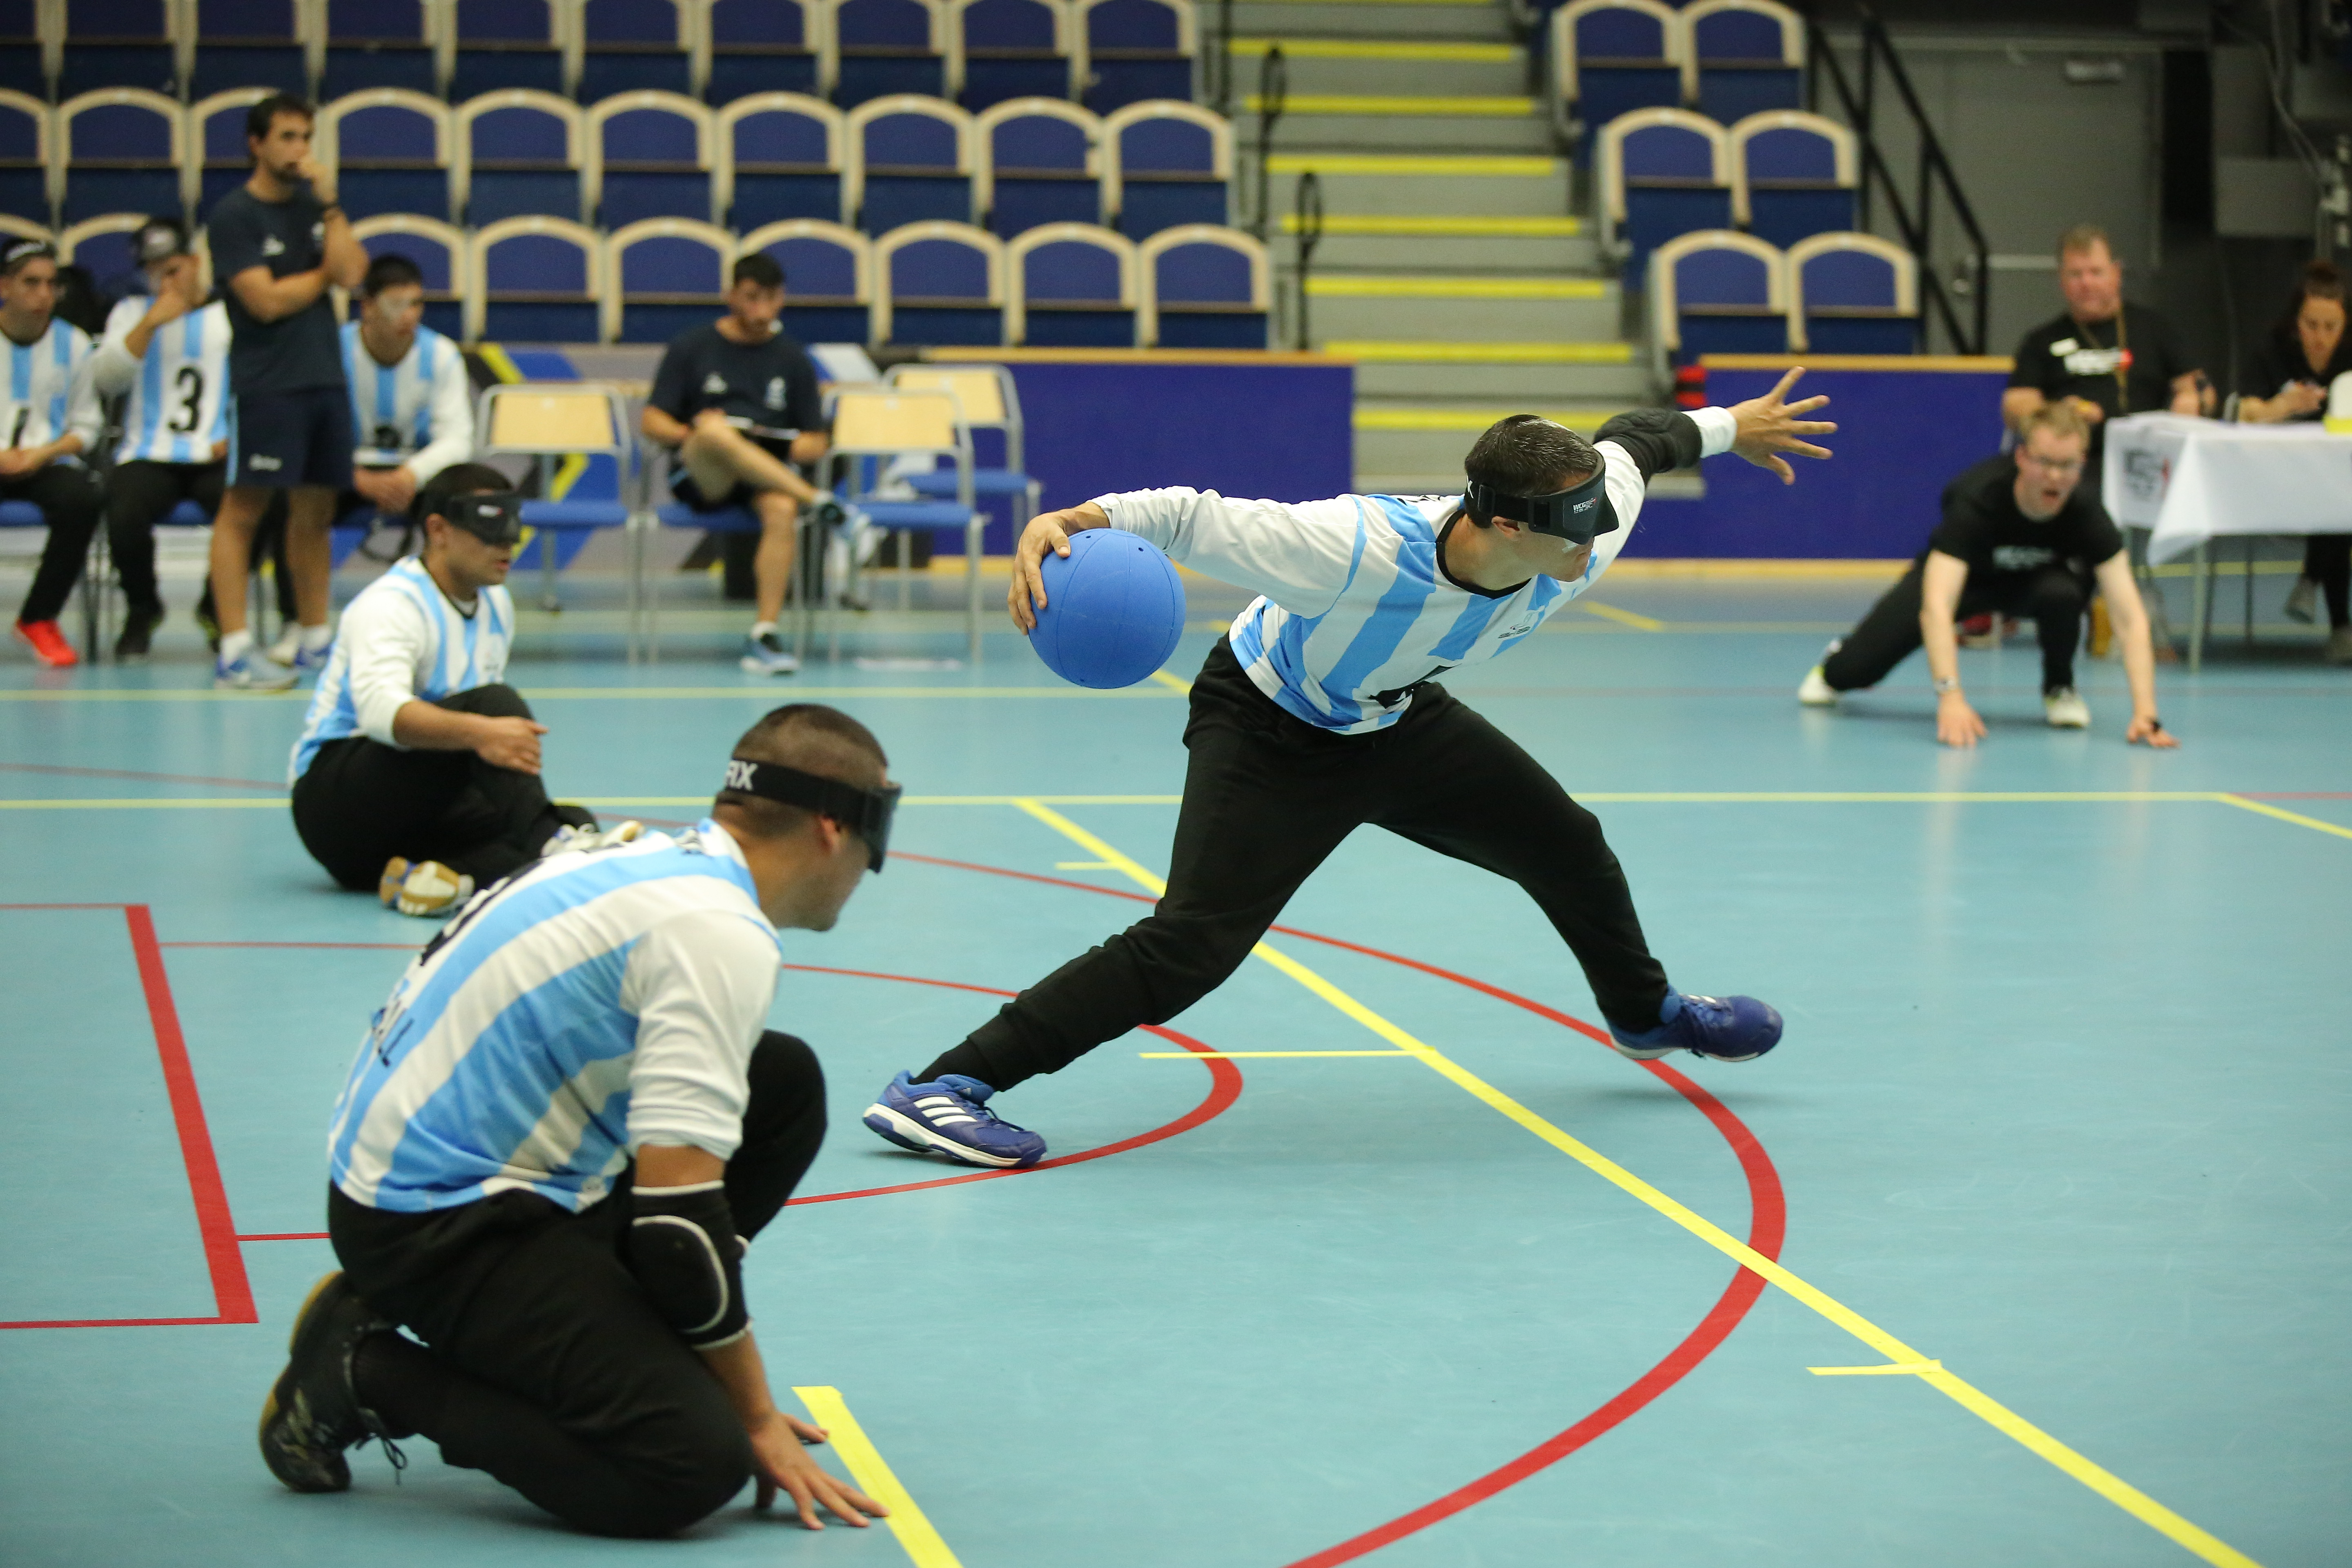 a male goalball player prepares to take a shot while two others wait beside him